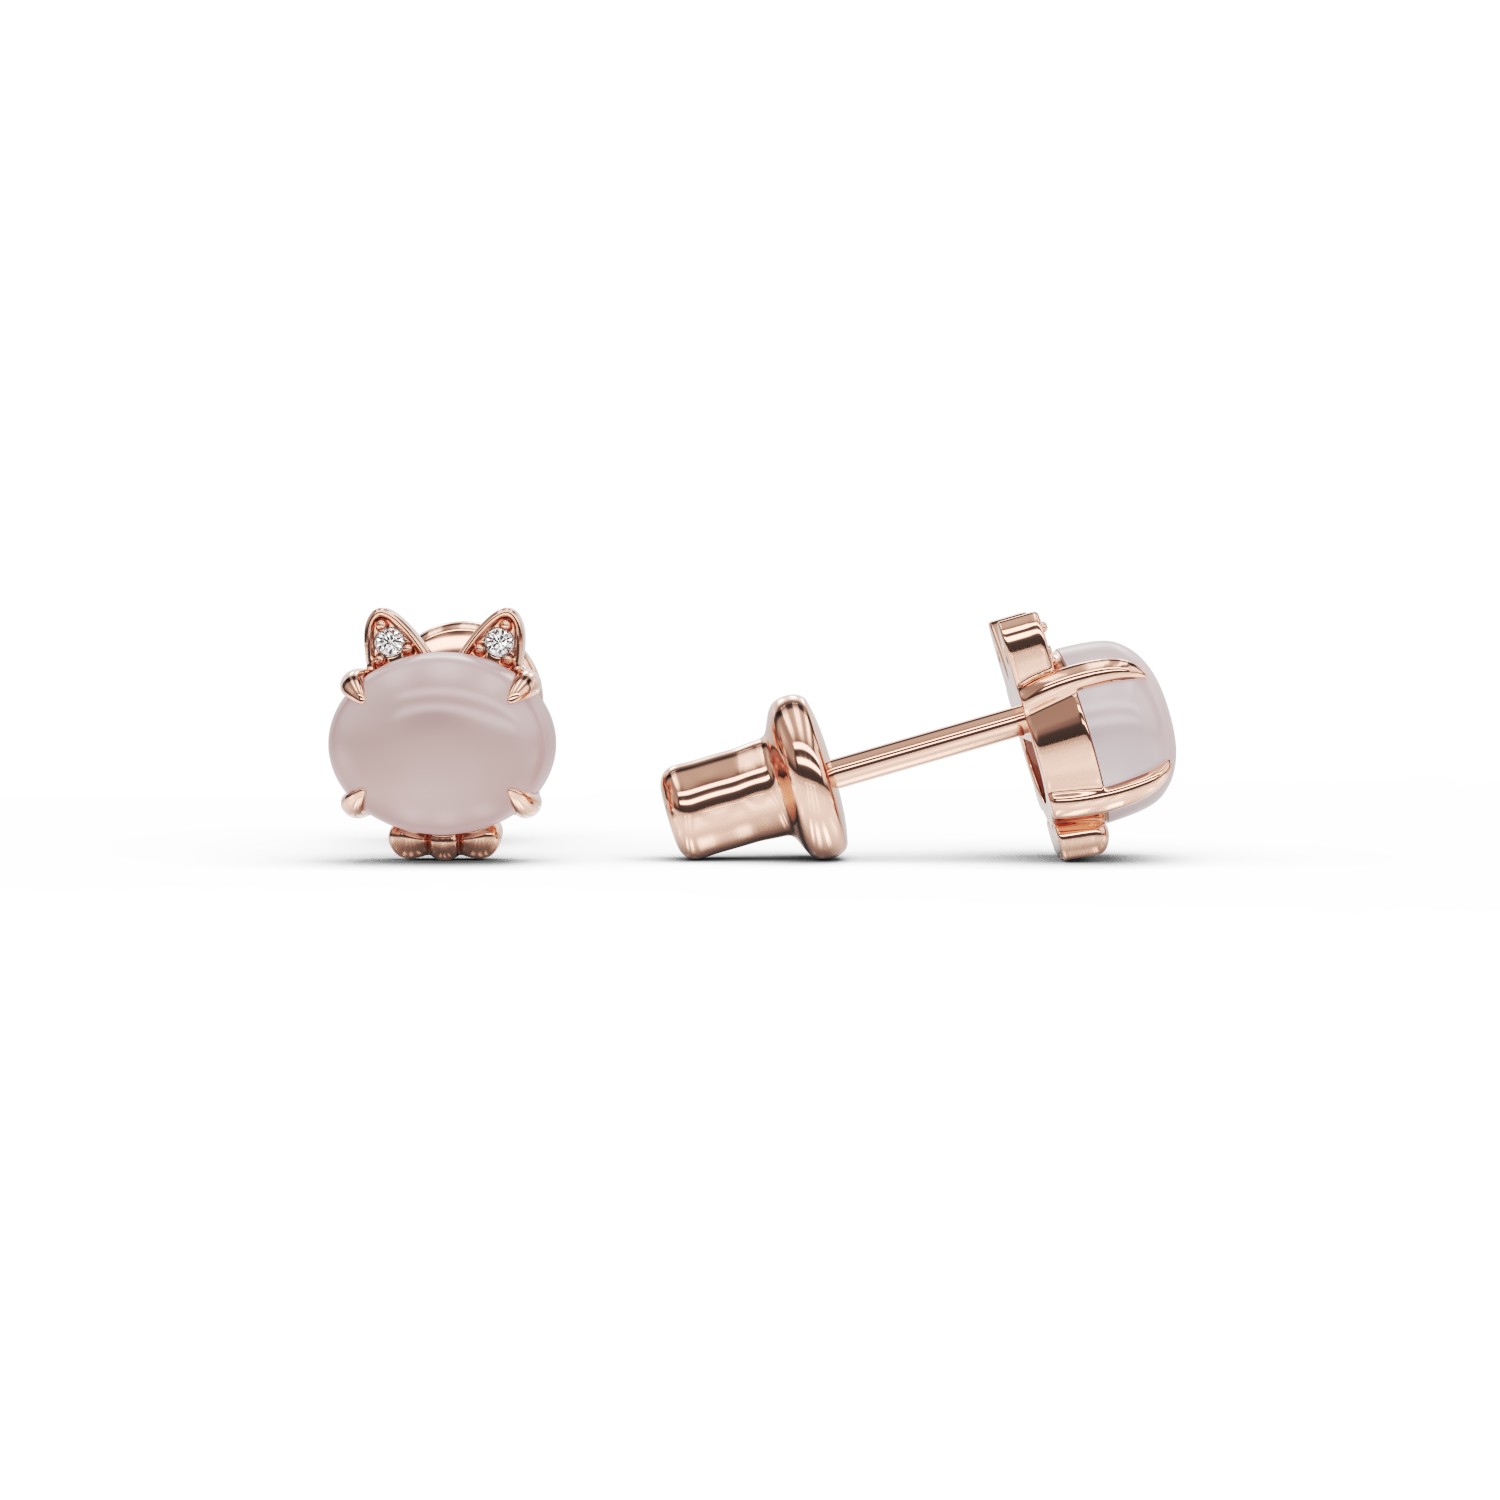 14K rose gold cats children earrings with rose quartz of 0.97ct and diamonds of 0.012ct